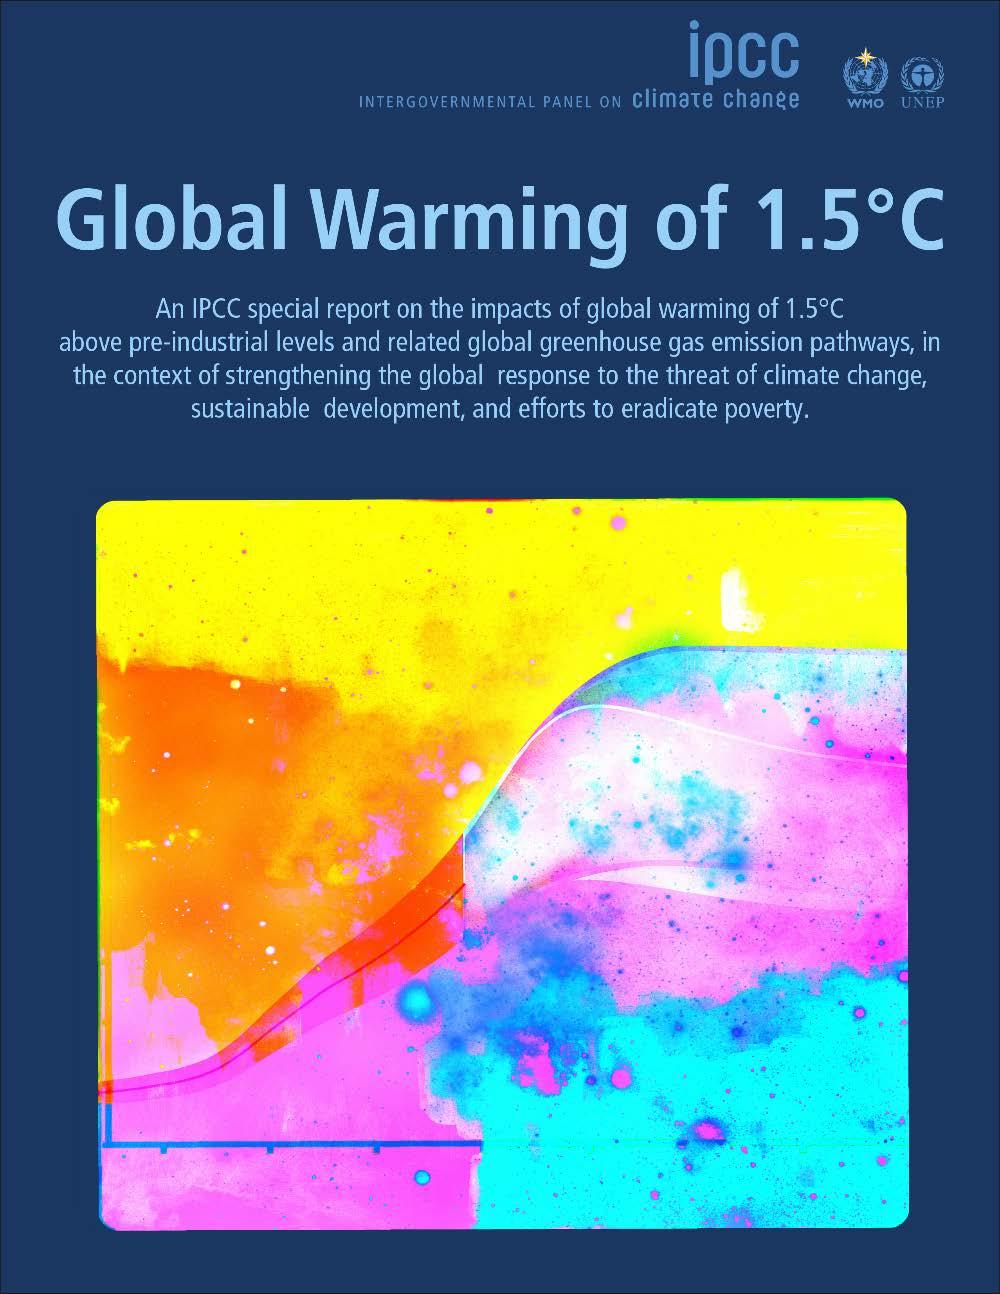 ipcc.ch/report/sr15 : Summary for Policy Makers